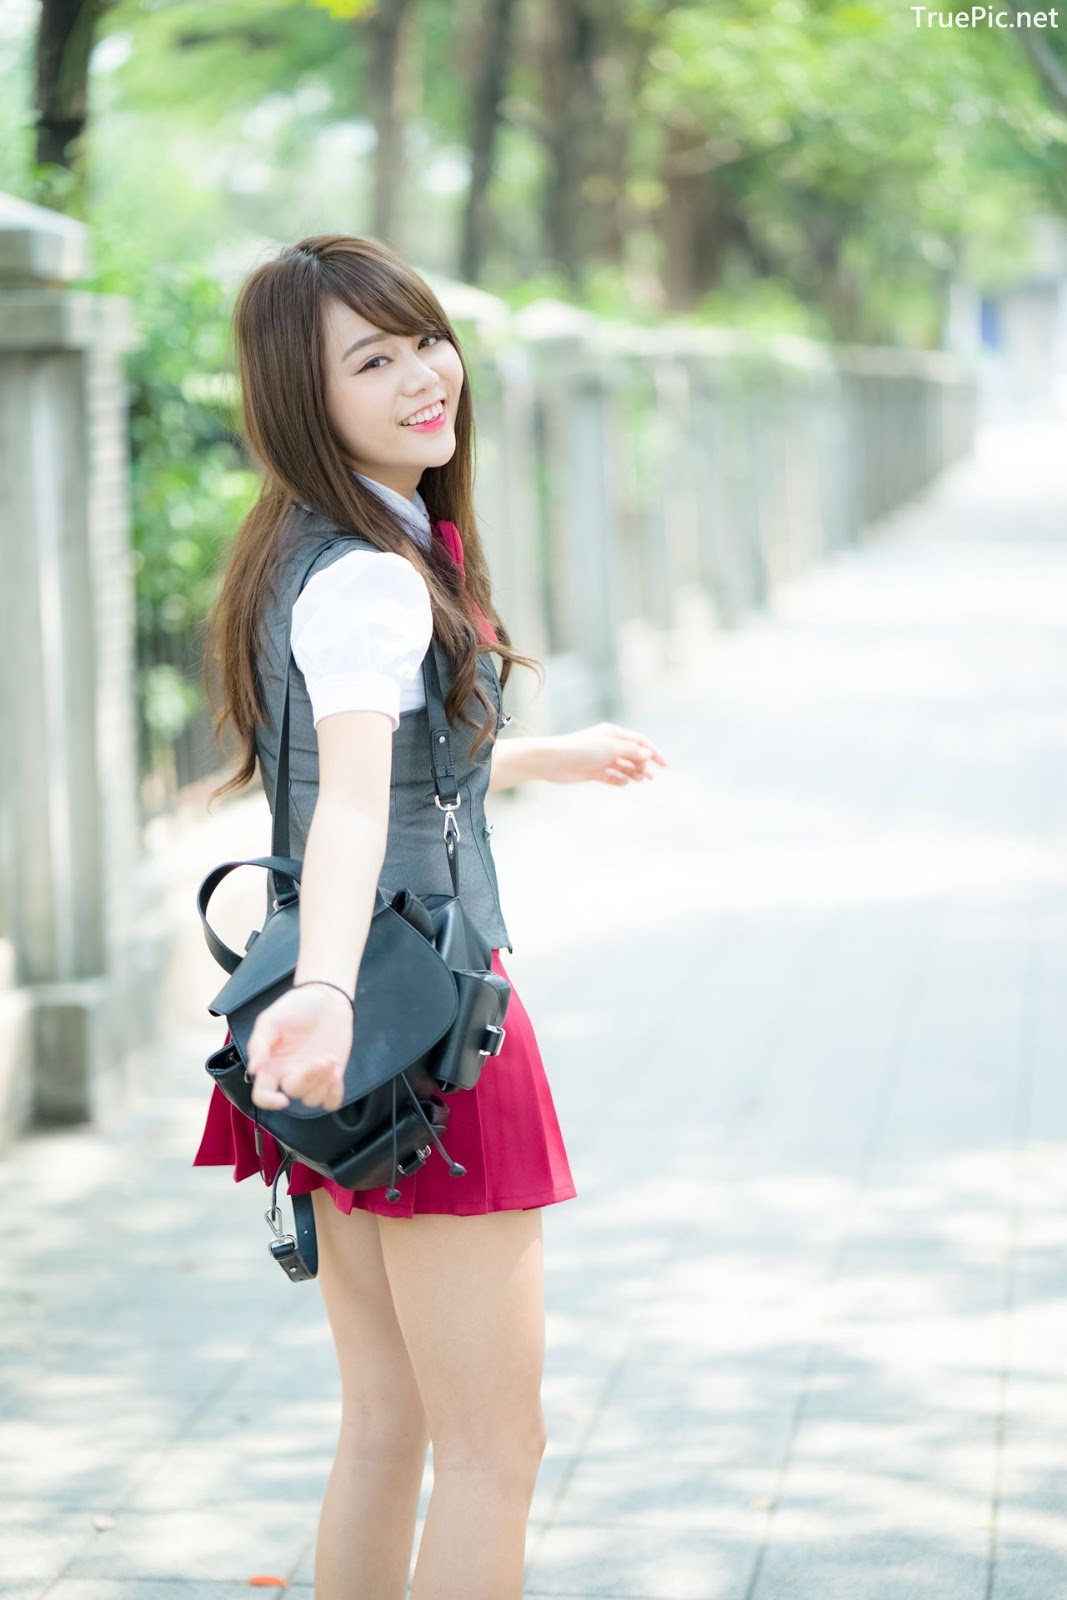 Image-Taiwan-Social-Celebrity-Sun-Hui-Tong-孫卉彤-A-Day-as-Student-Girl-TruePic.net- Picture-83